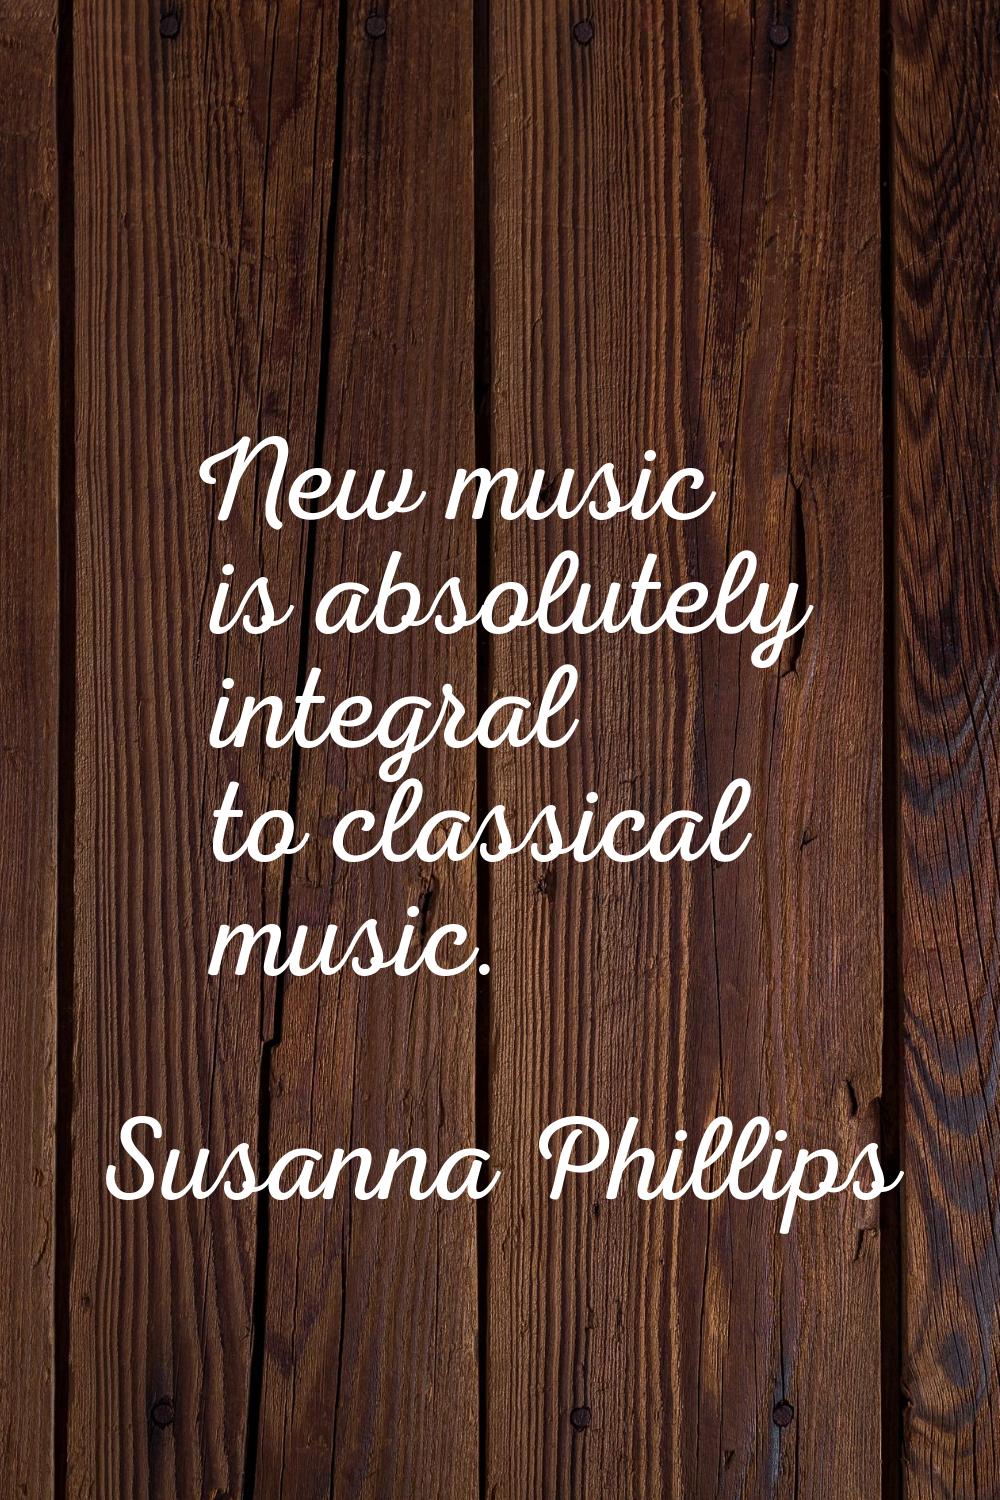 New music is absolutely integral to classical music.